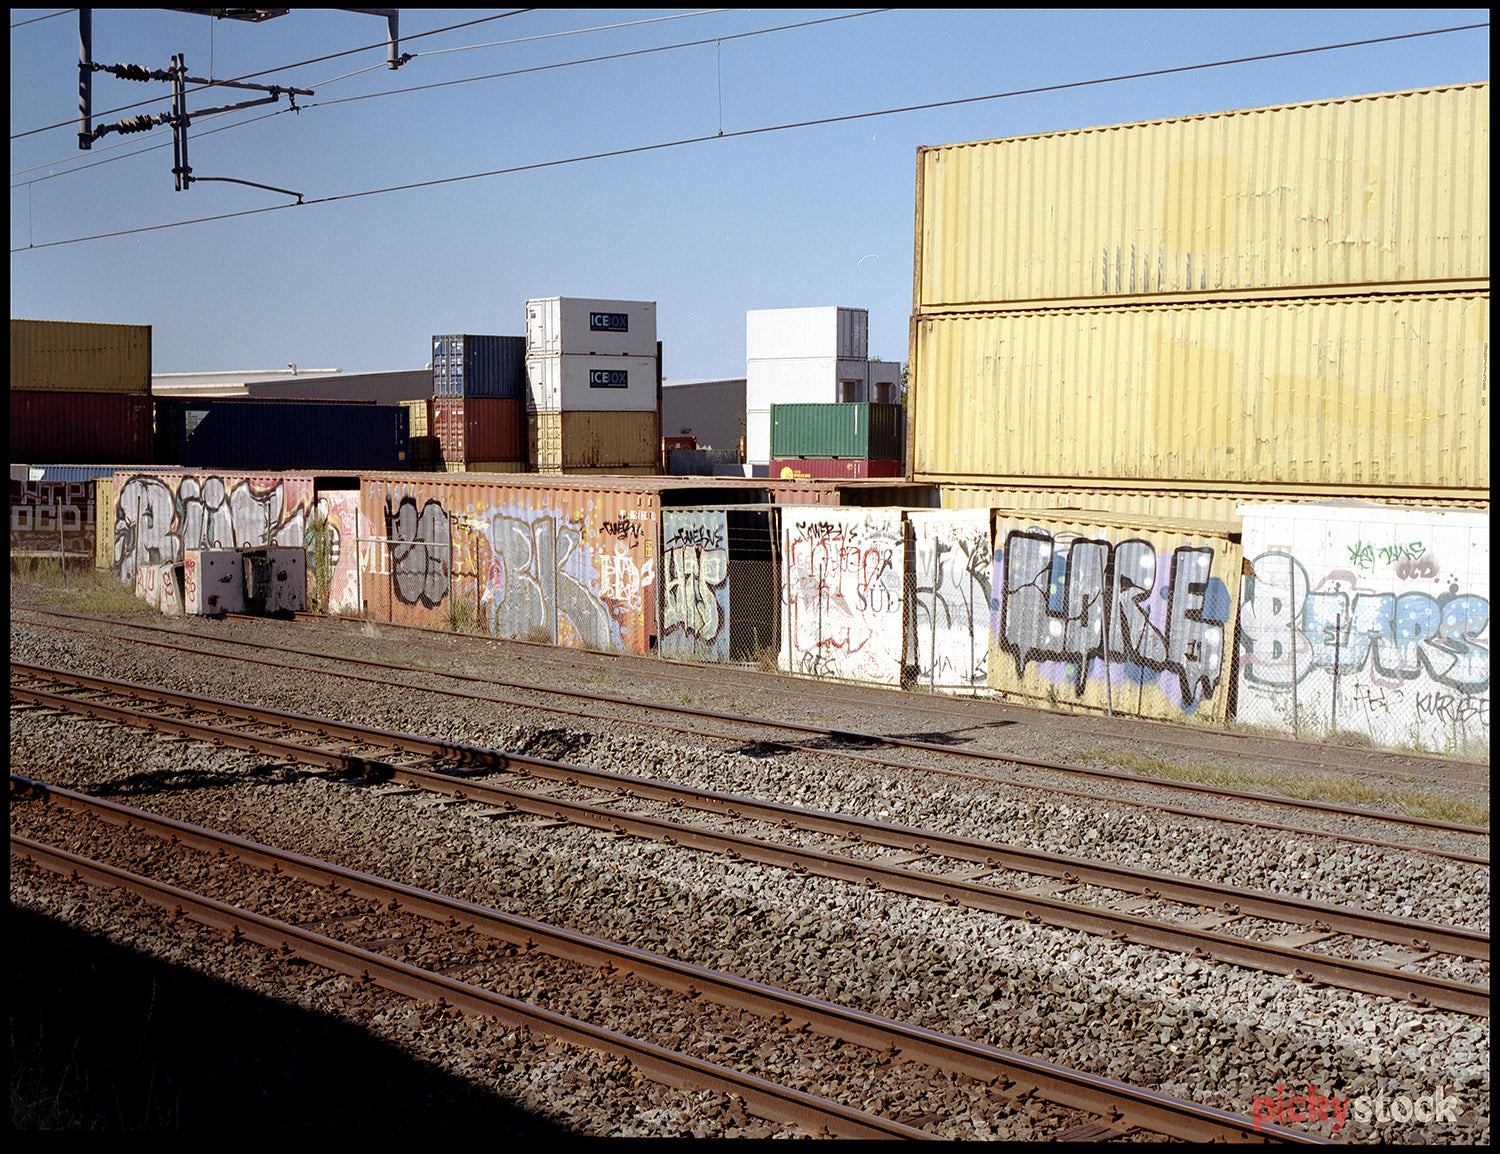 At the railway station, looking out over the train tracks towards the grafitti. 